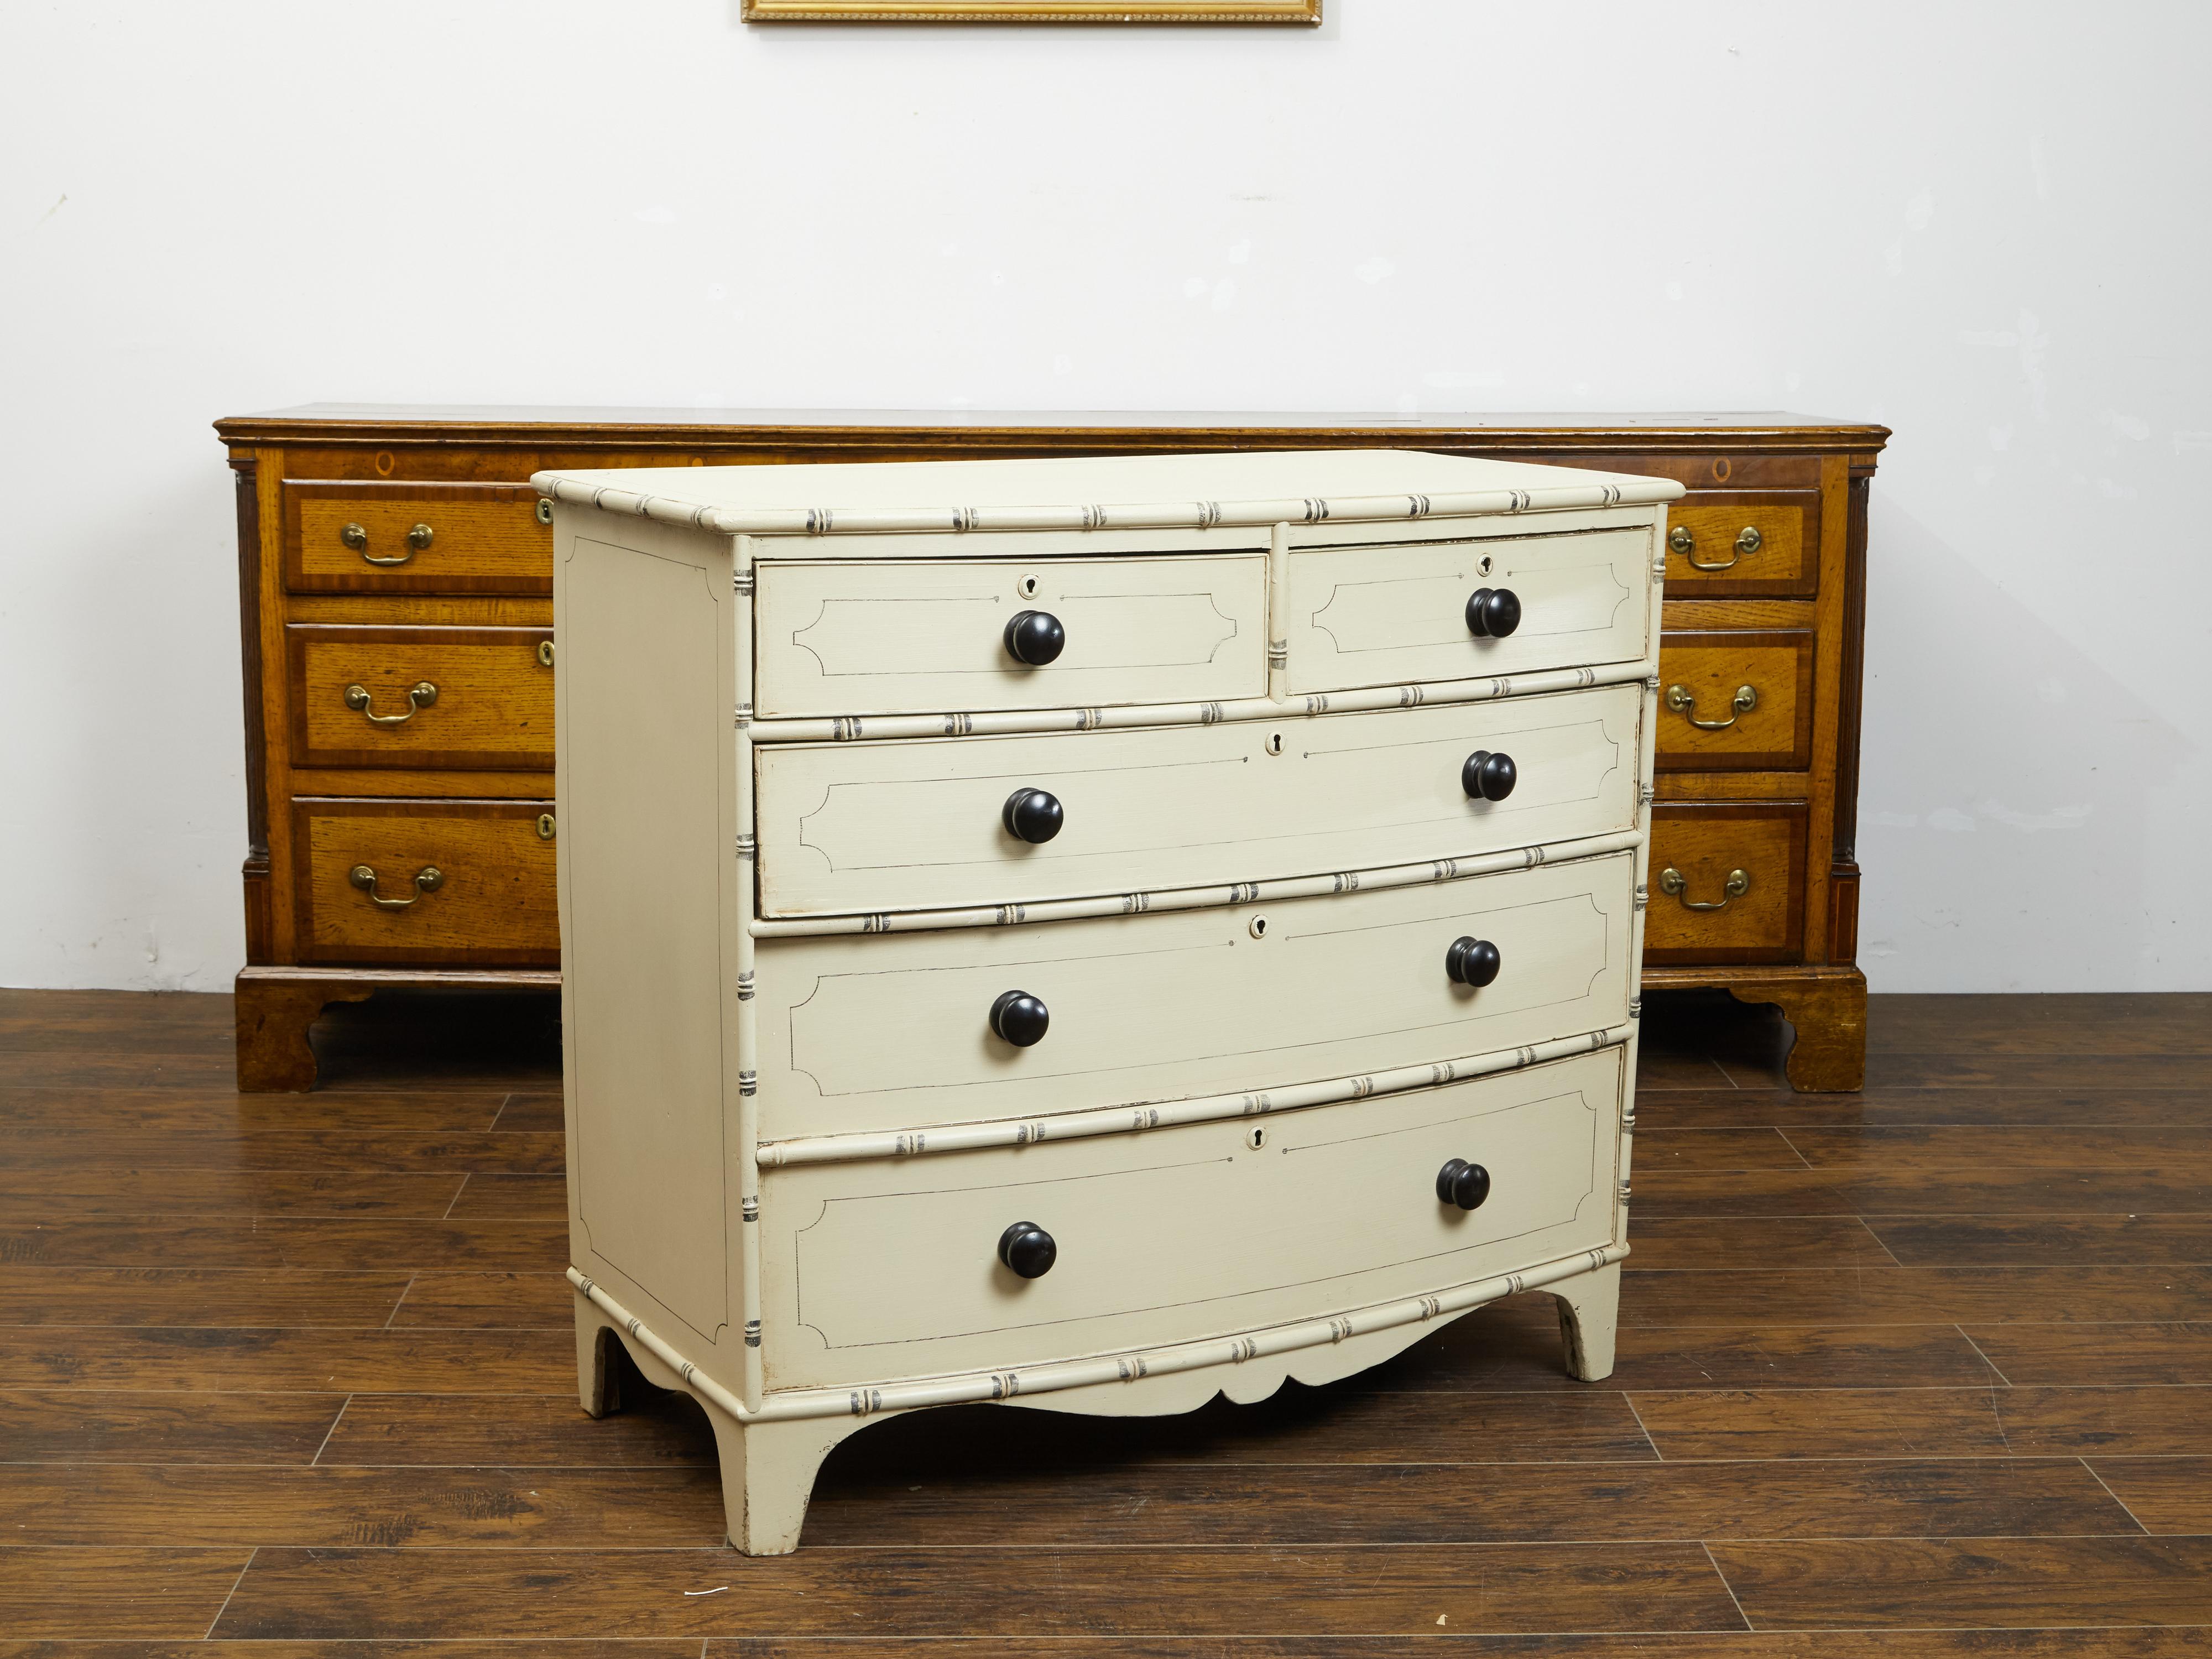 An English bow front five-drawer chest from the mid 19th century, with new paint. Created in England during the third quarter of the 19th century, this painted chest features a rectangular bow front top sitting above five drawers (two small ones